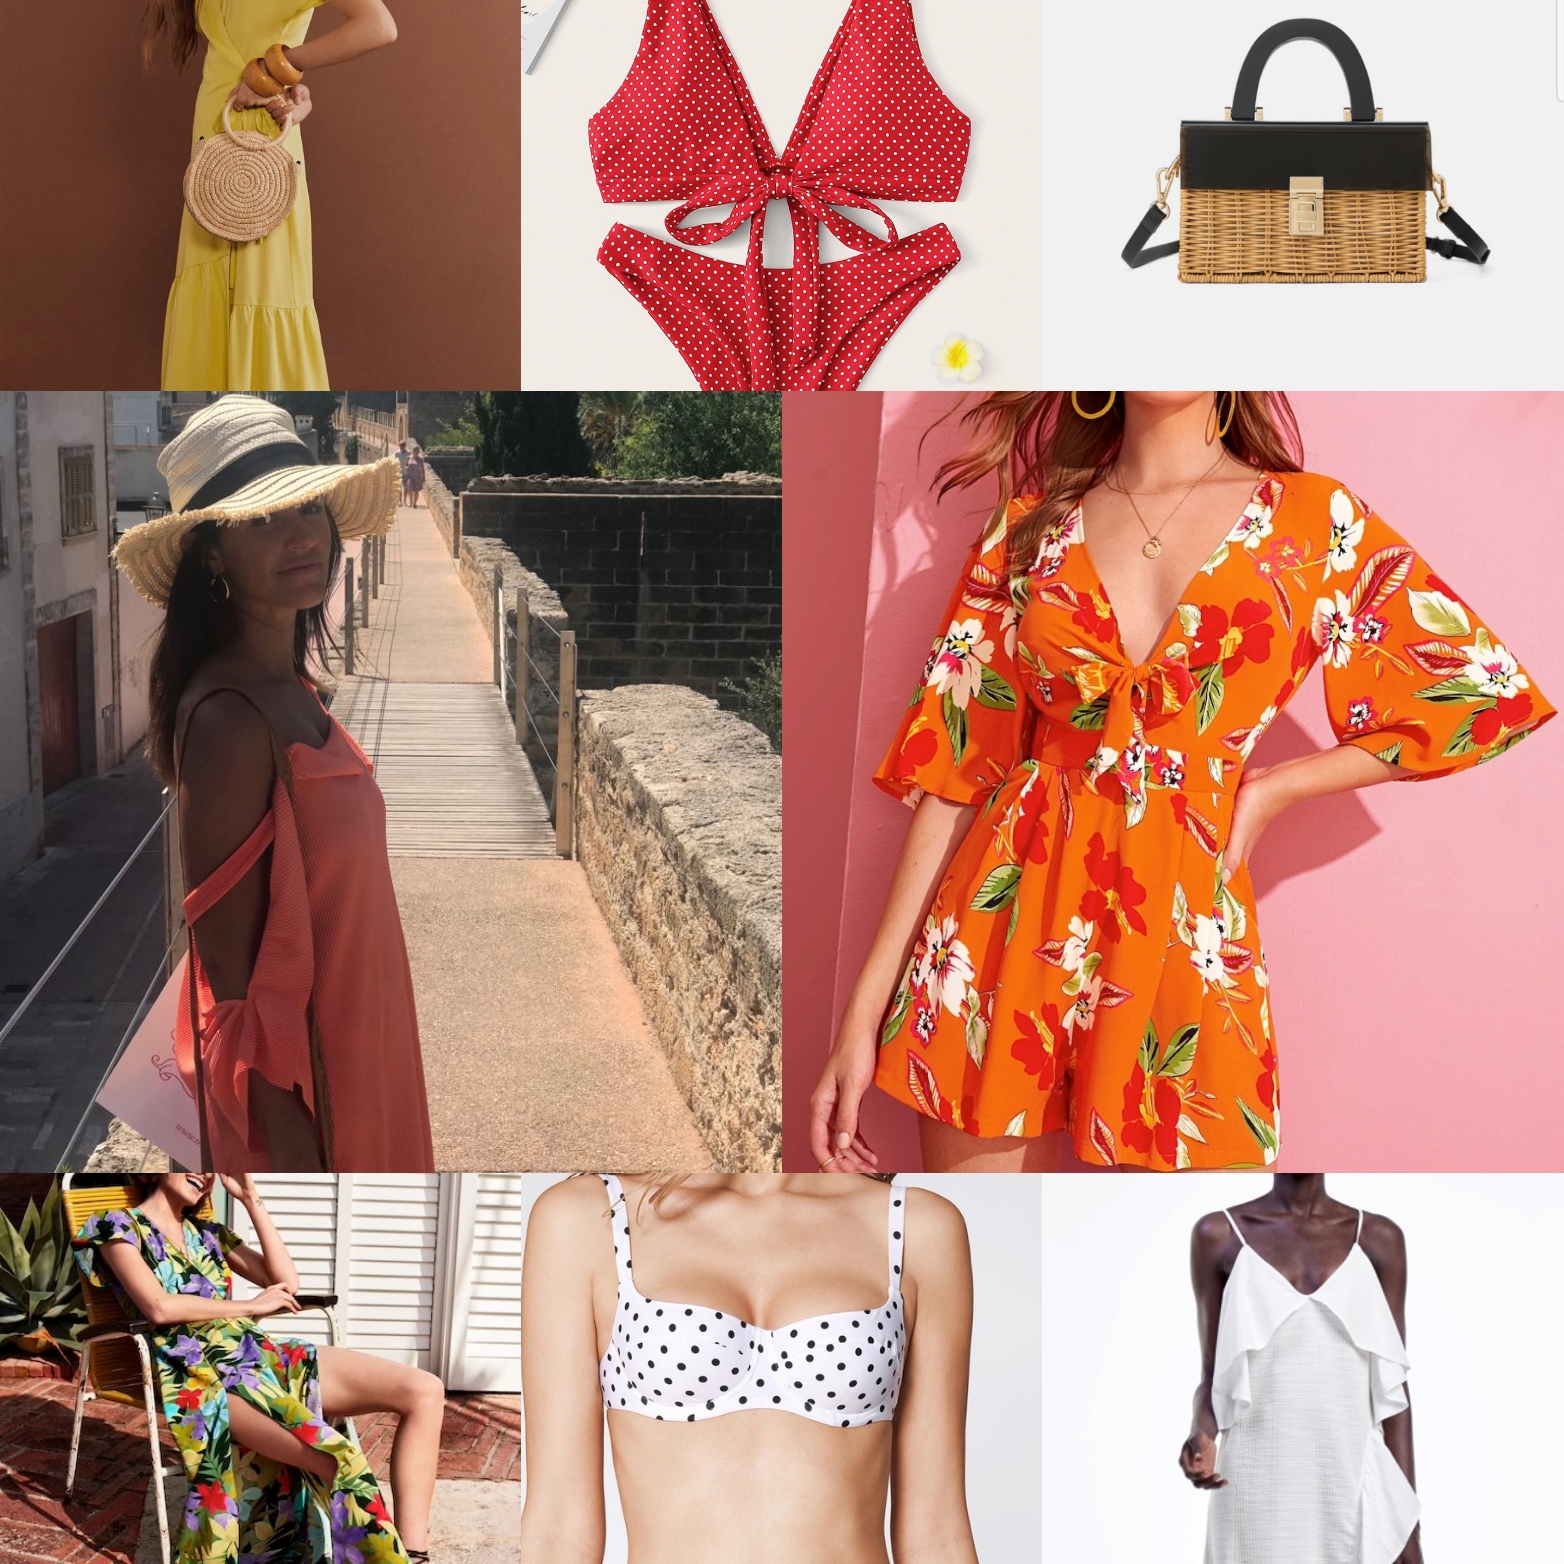 [:it]Shopping for the sea? Top and low cost garments and accessories to buy [:in]SHOPPING FOR THE SEA? TOP AND LOW-COST ITEMS AND ACCESSORIES TO BUY[:]